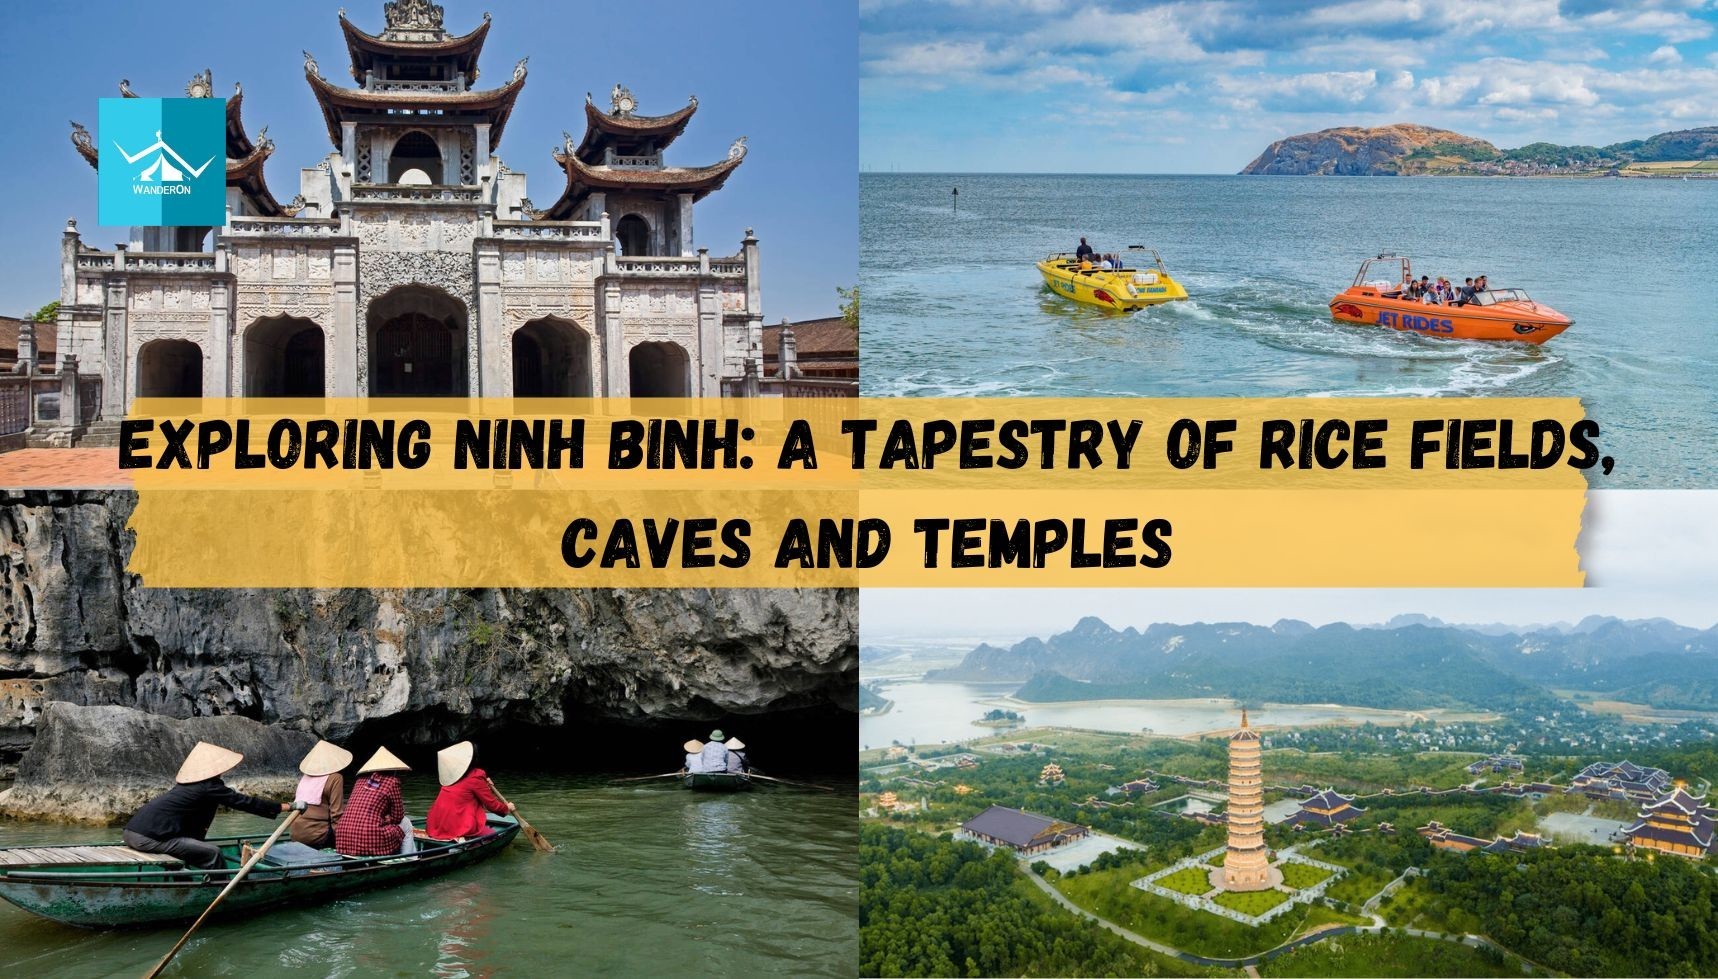 Exploring Ninh Binh: A Tapestry Of Rice Fields, Caves And Temples